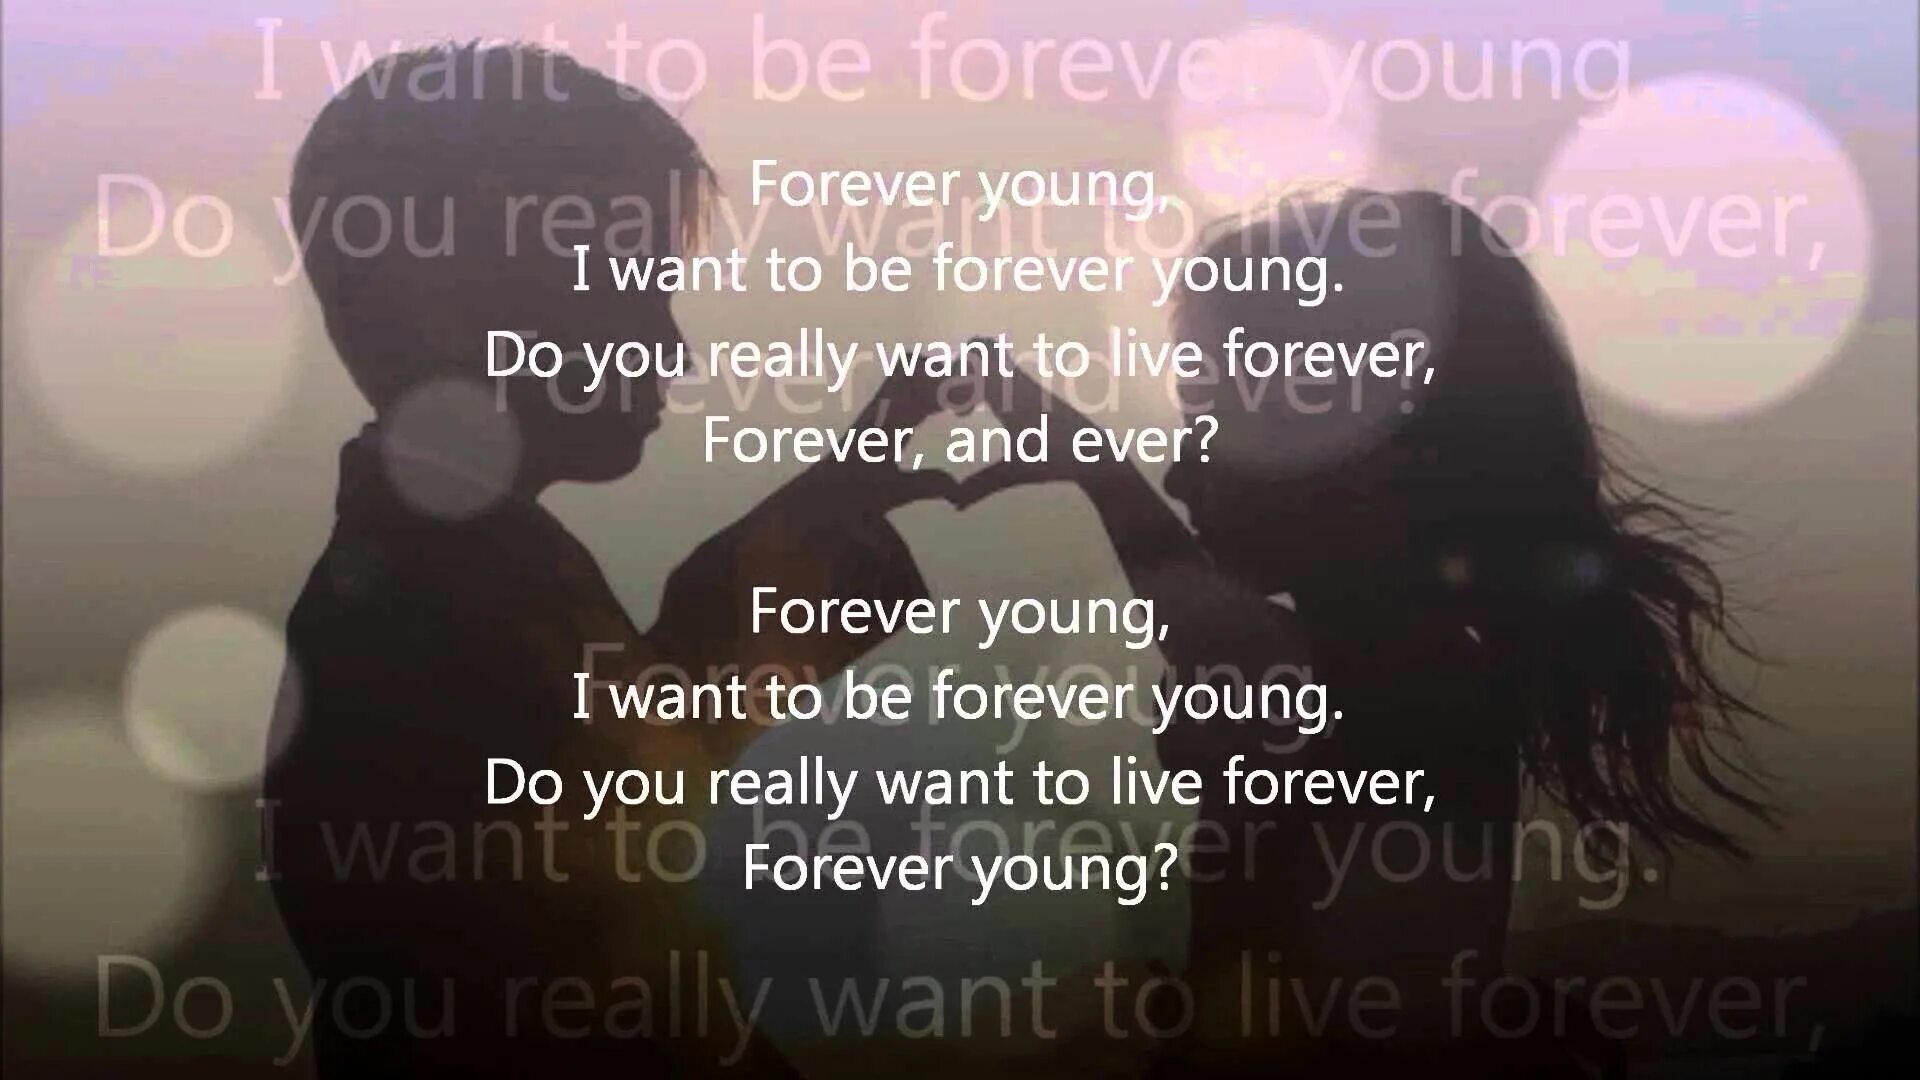 Песня do you really. I wanna be Forever young. Forever young Alphaville Lyrics. I wanna be Forever young Alphaville. Forever young i want to be Forever young.